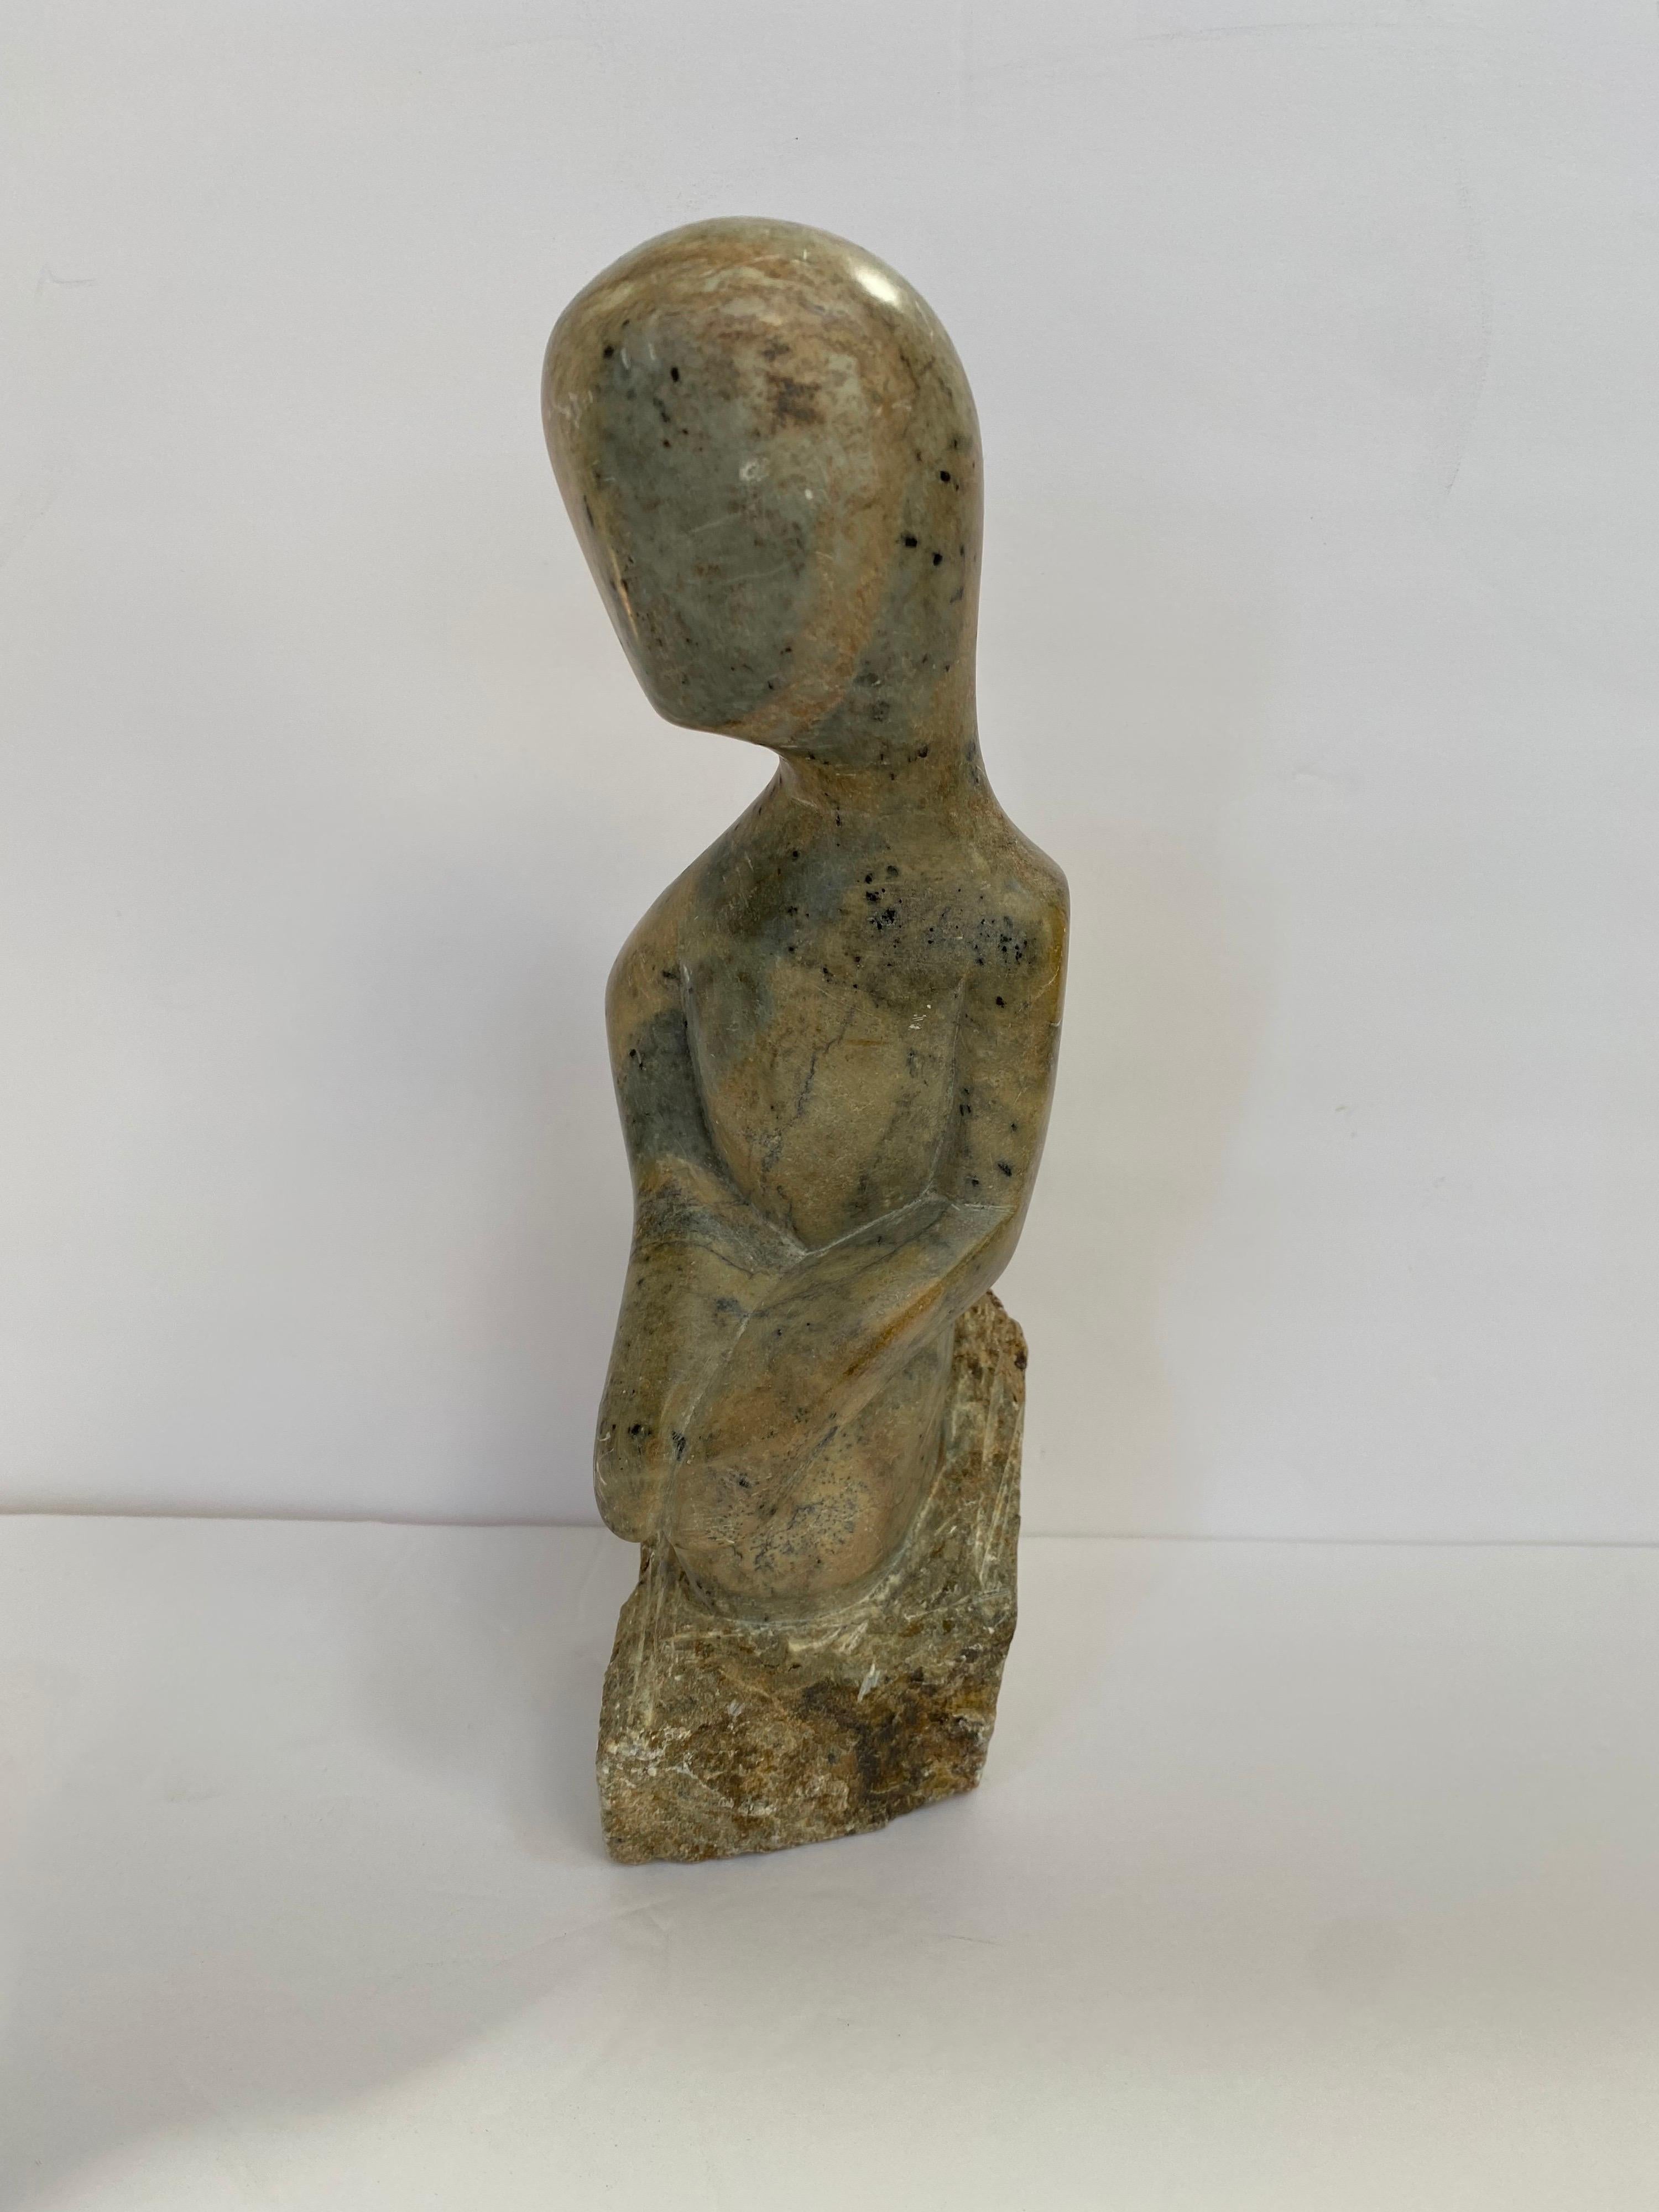 Mid-Century Modern marble figural form sculpture. This decorative object is carved from a single piece of stone.